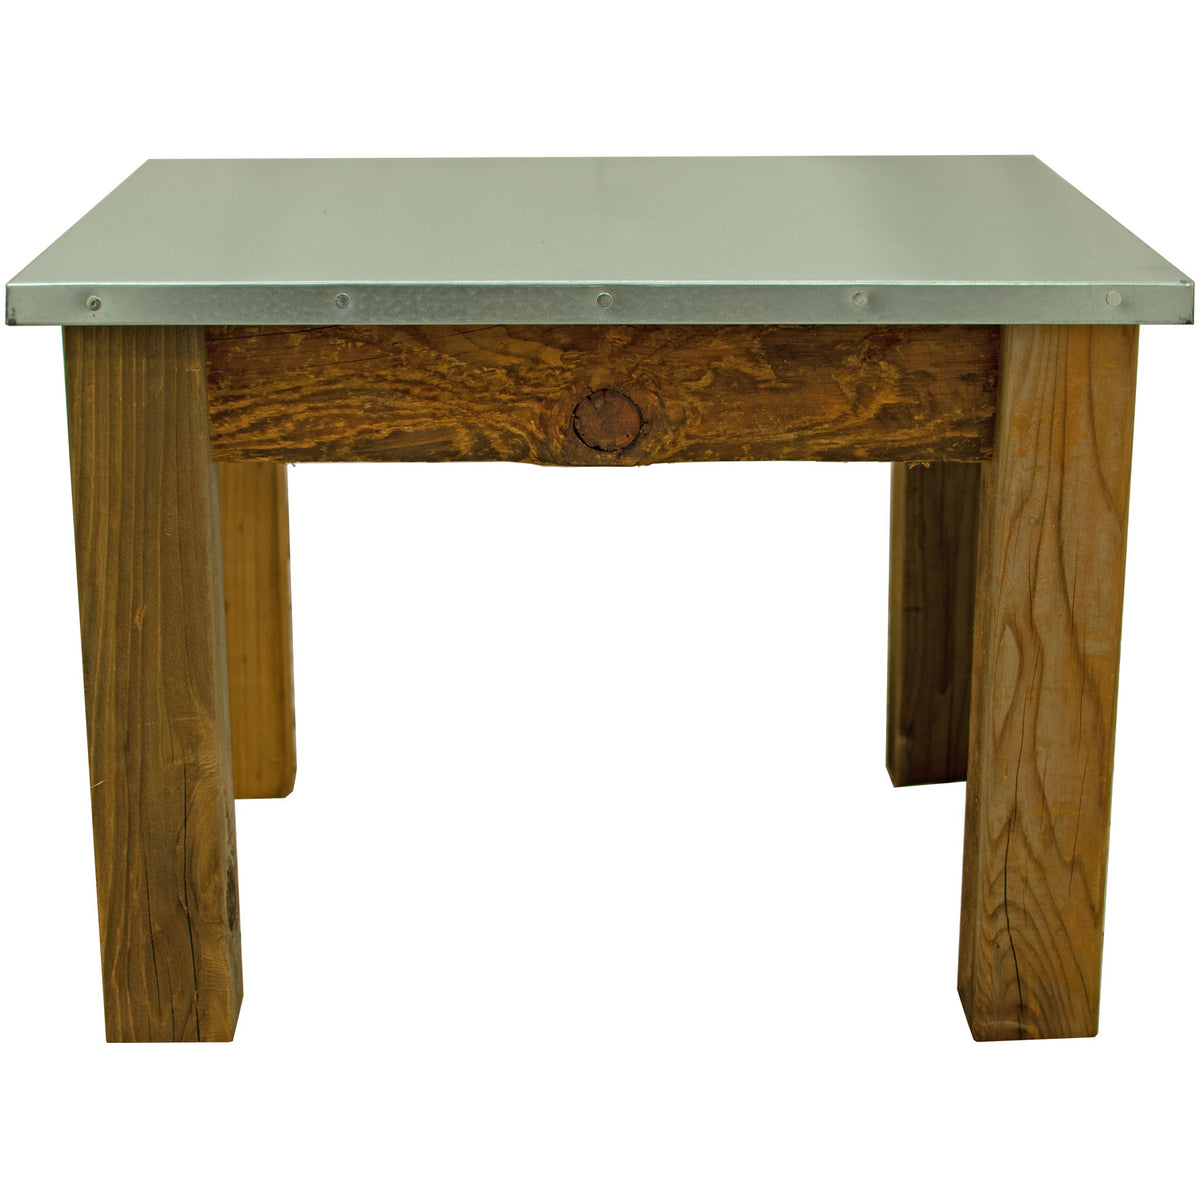 Outdoor Redwood Patio End Table on sale at Lee Display